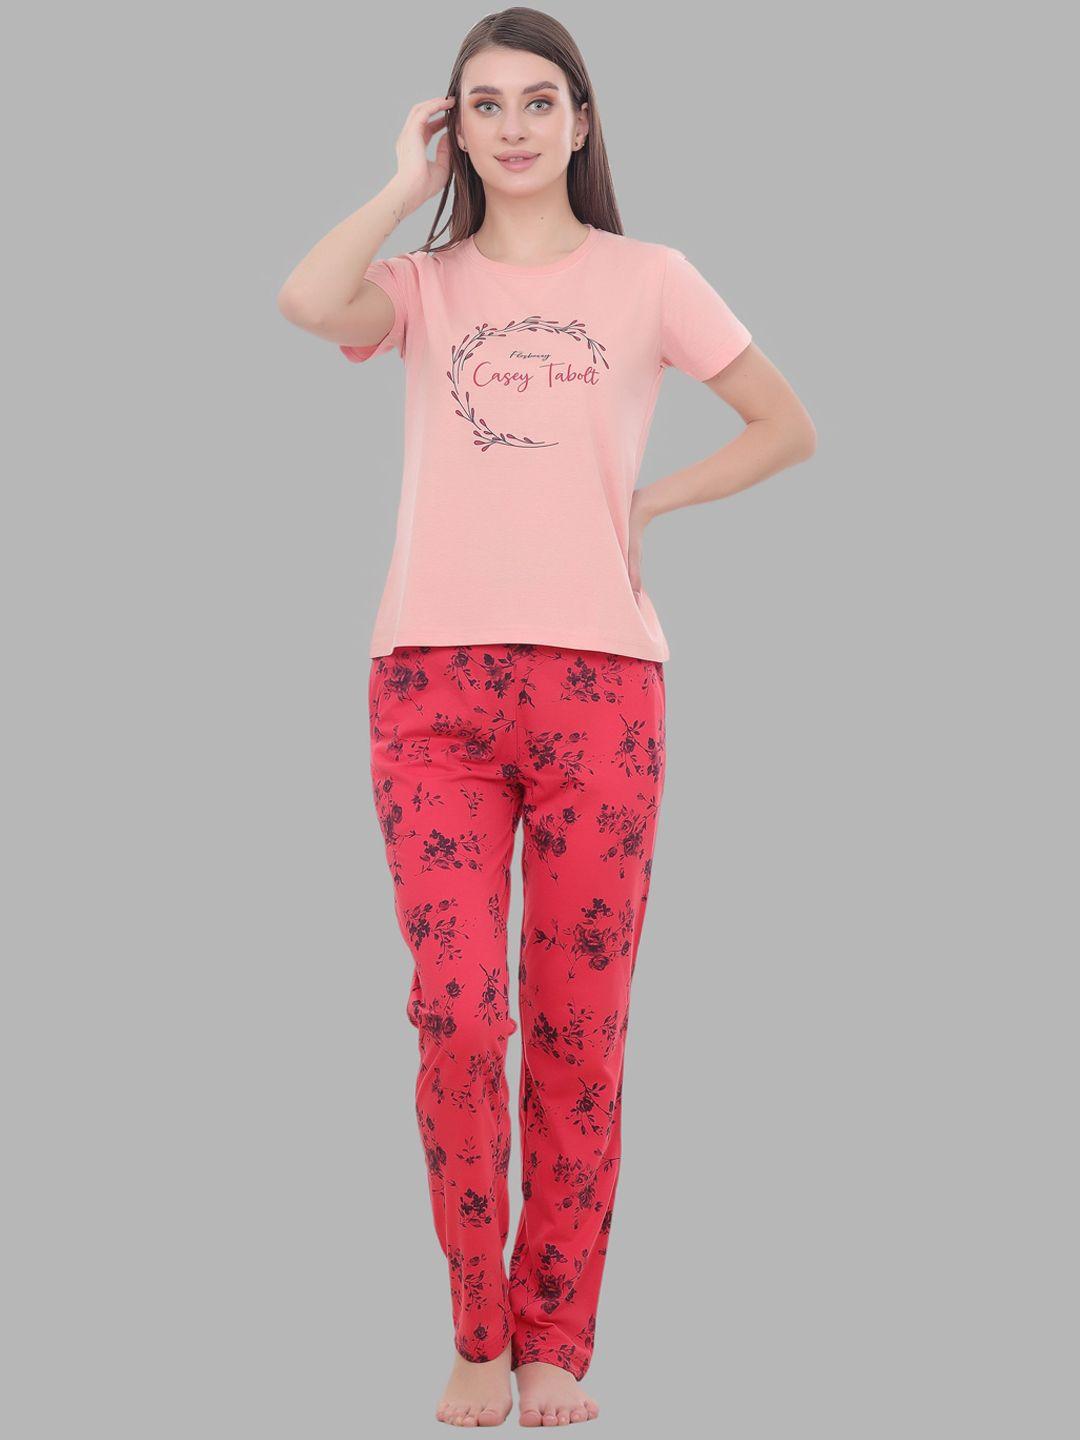 flosberry floral print night suit